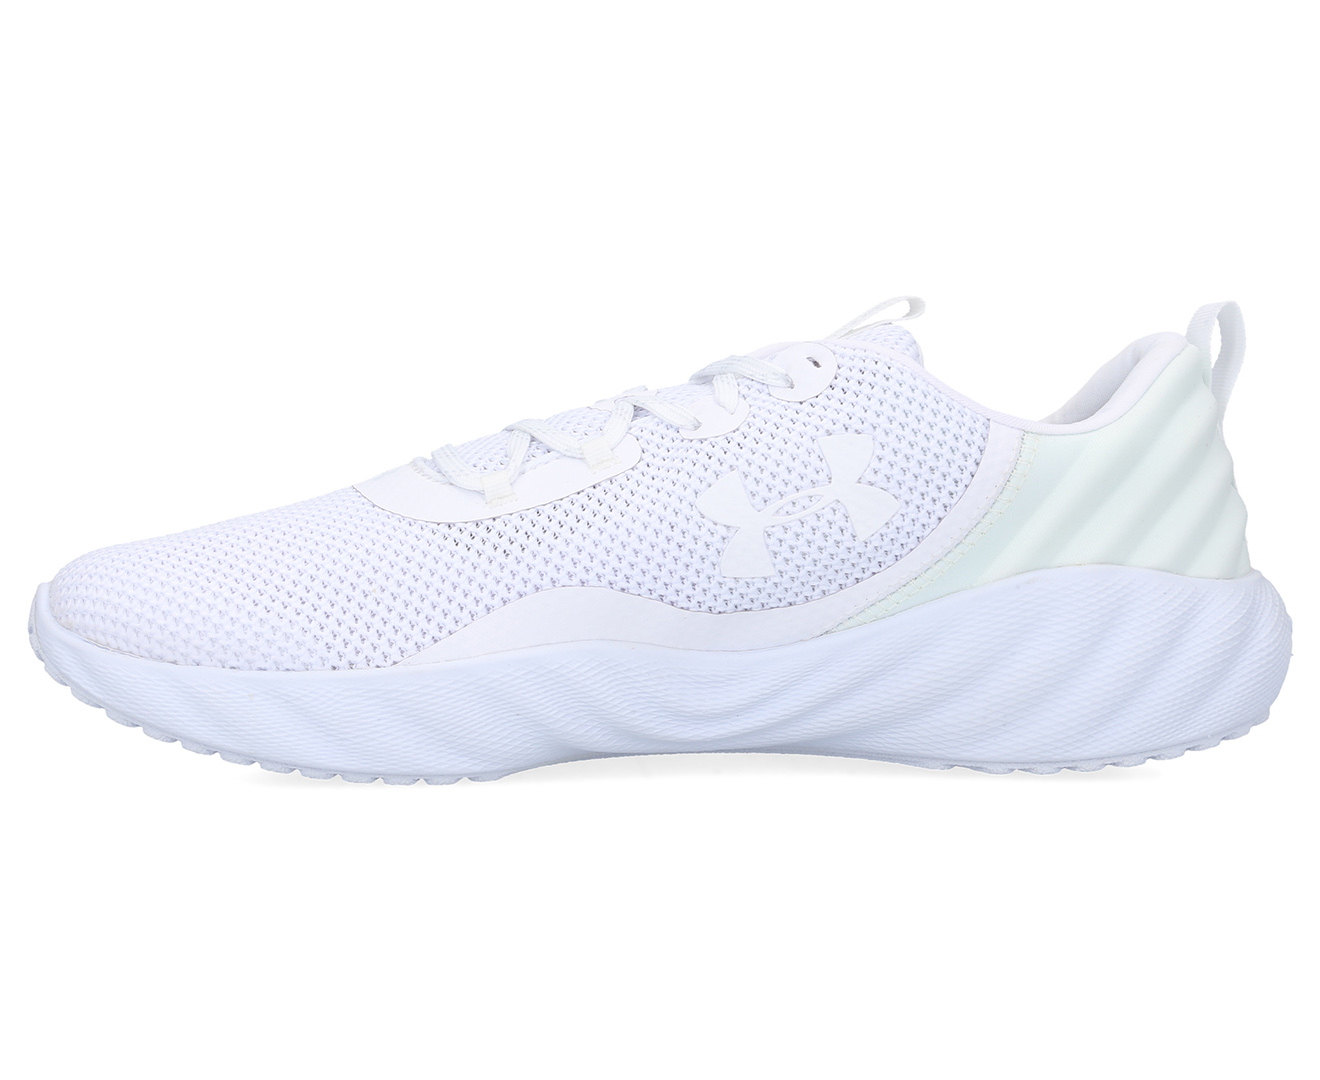 Under Armour Men's UA Charged Will Sneakers - White | Catch.co.nz